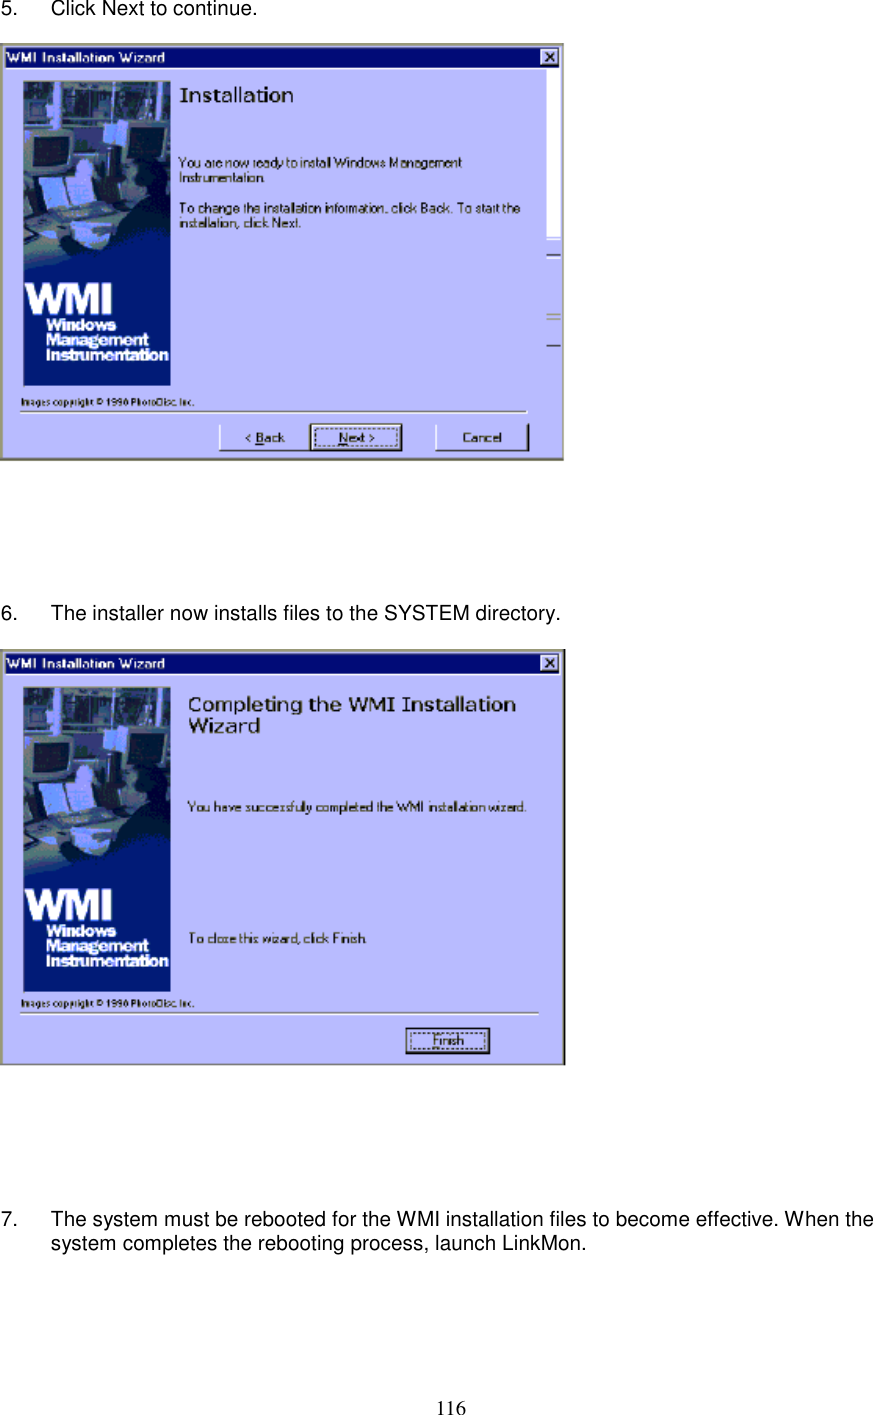 1165.  Click Next to continue.6.  The installer now installs files to the SYSTEM directory.7.  The system must be rebooted for the WMI installation files to become effective. When thesystem completes the rebooting process, launch LinkMon.